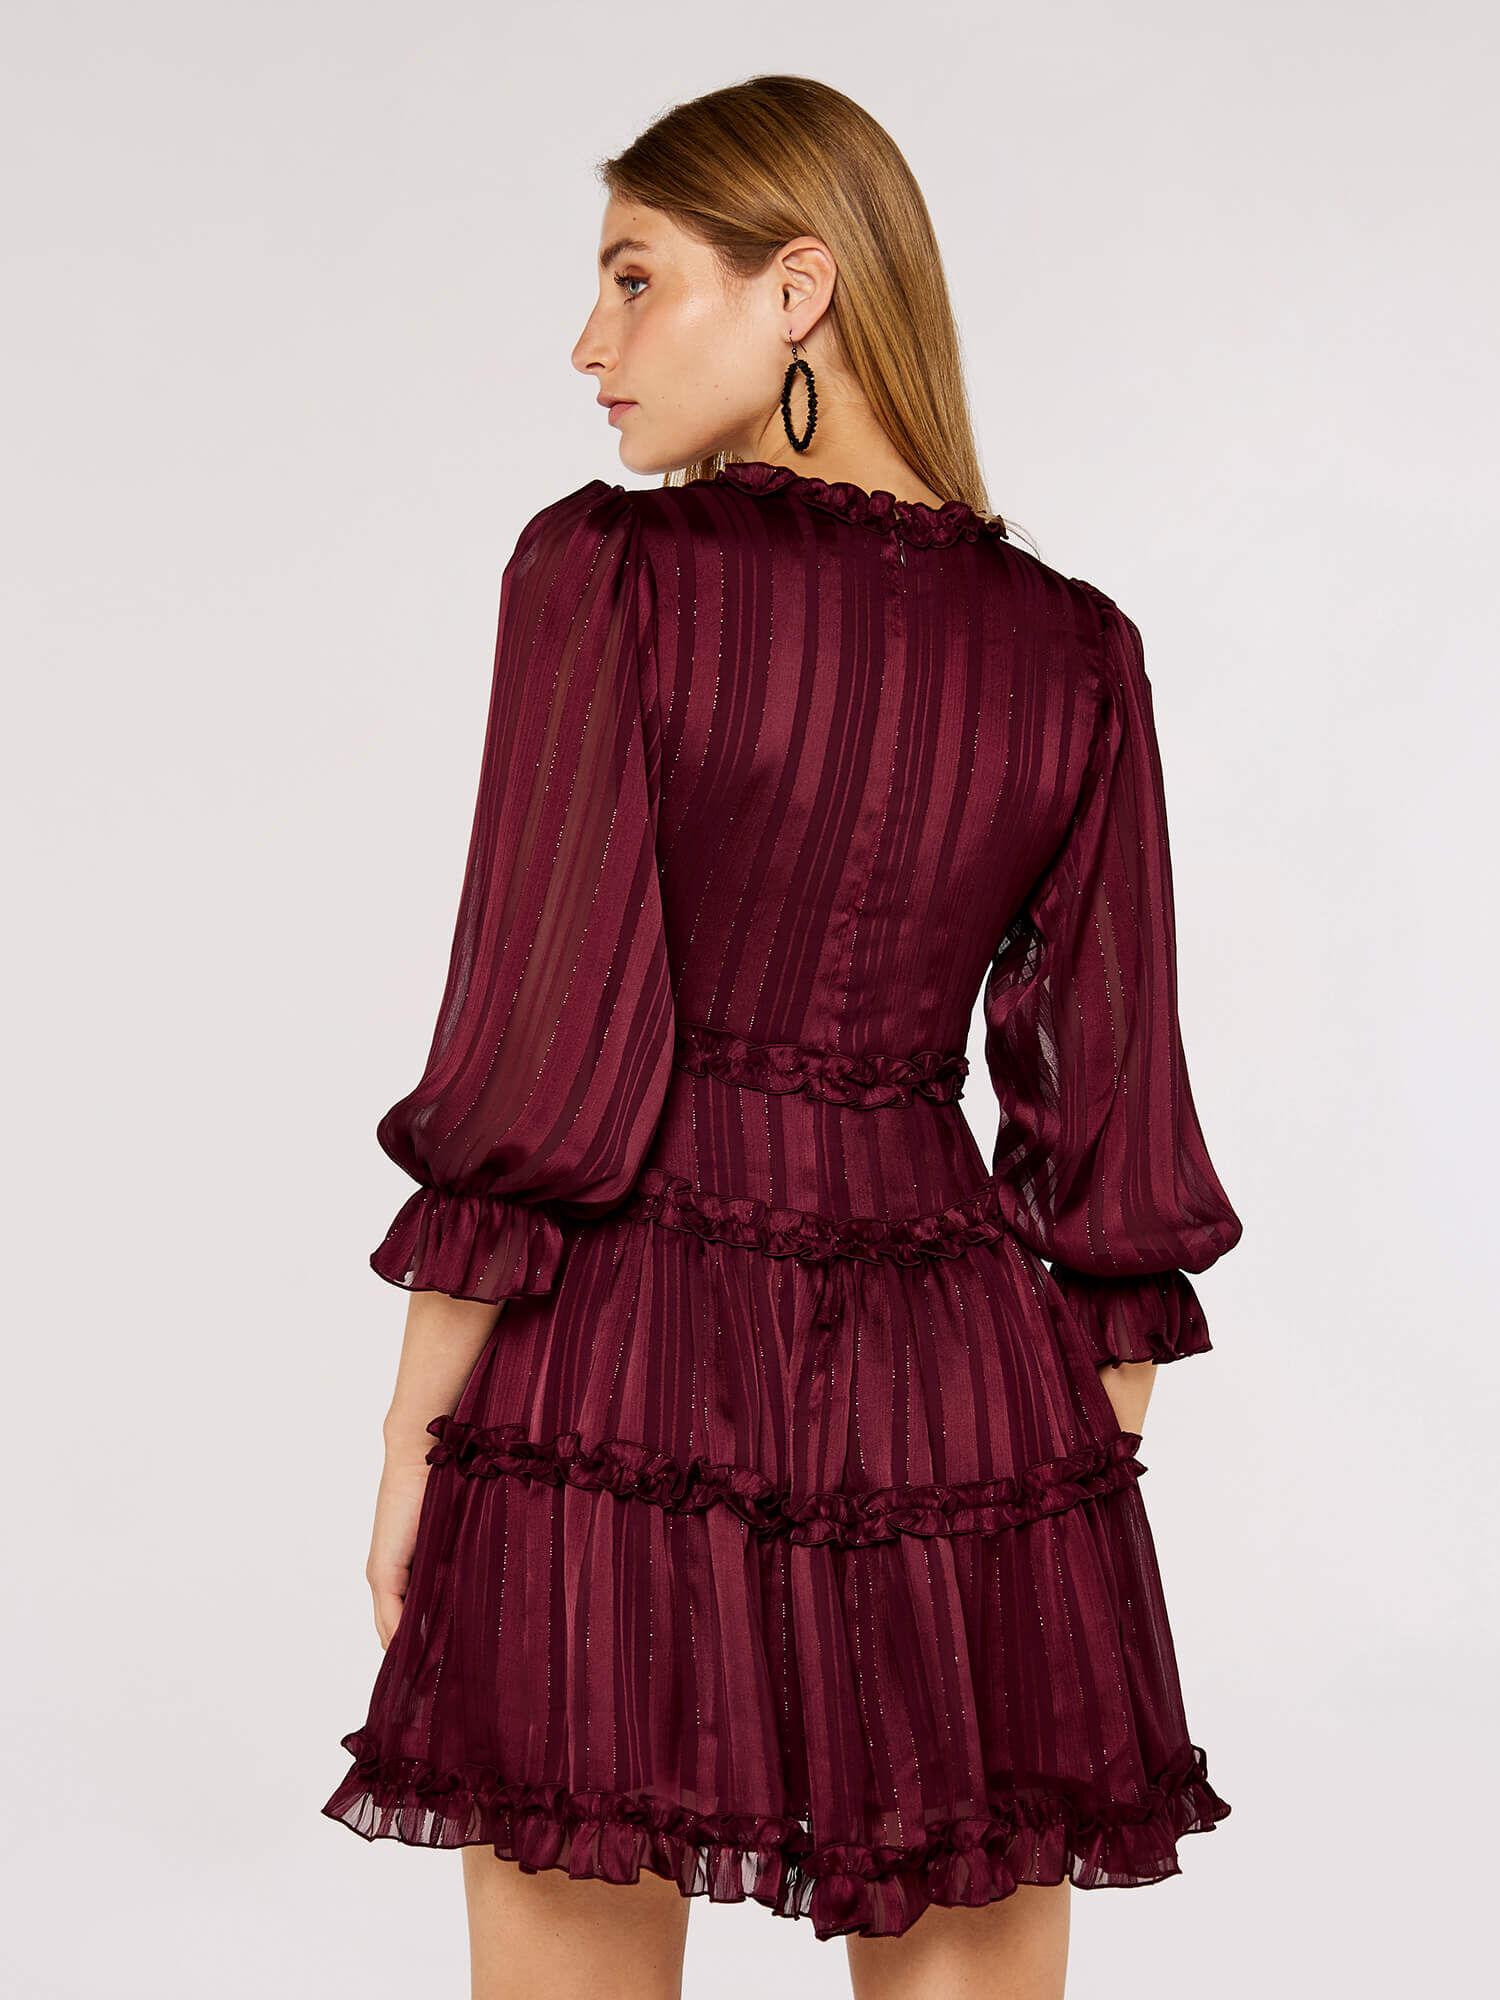 Tiered Pleated Ruffle Dress - Ask Dress Boutique